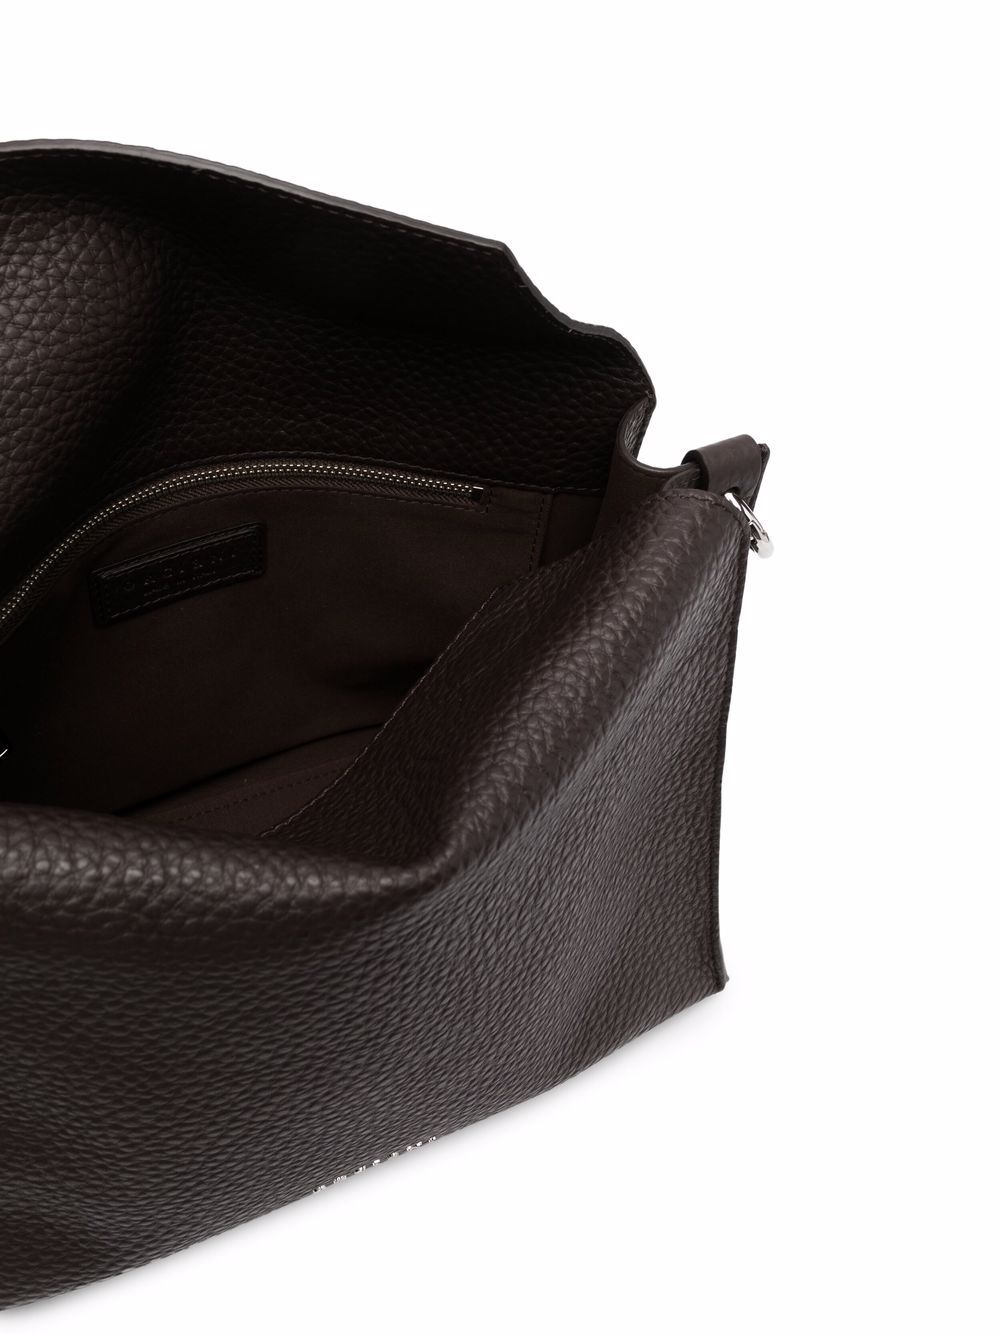 Shop Orciani Twenty Soft leather tote bag with Express Delivery - FARFETCH